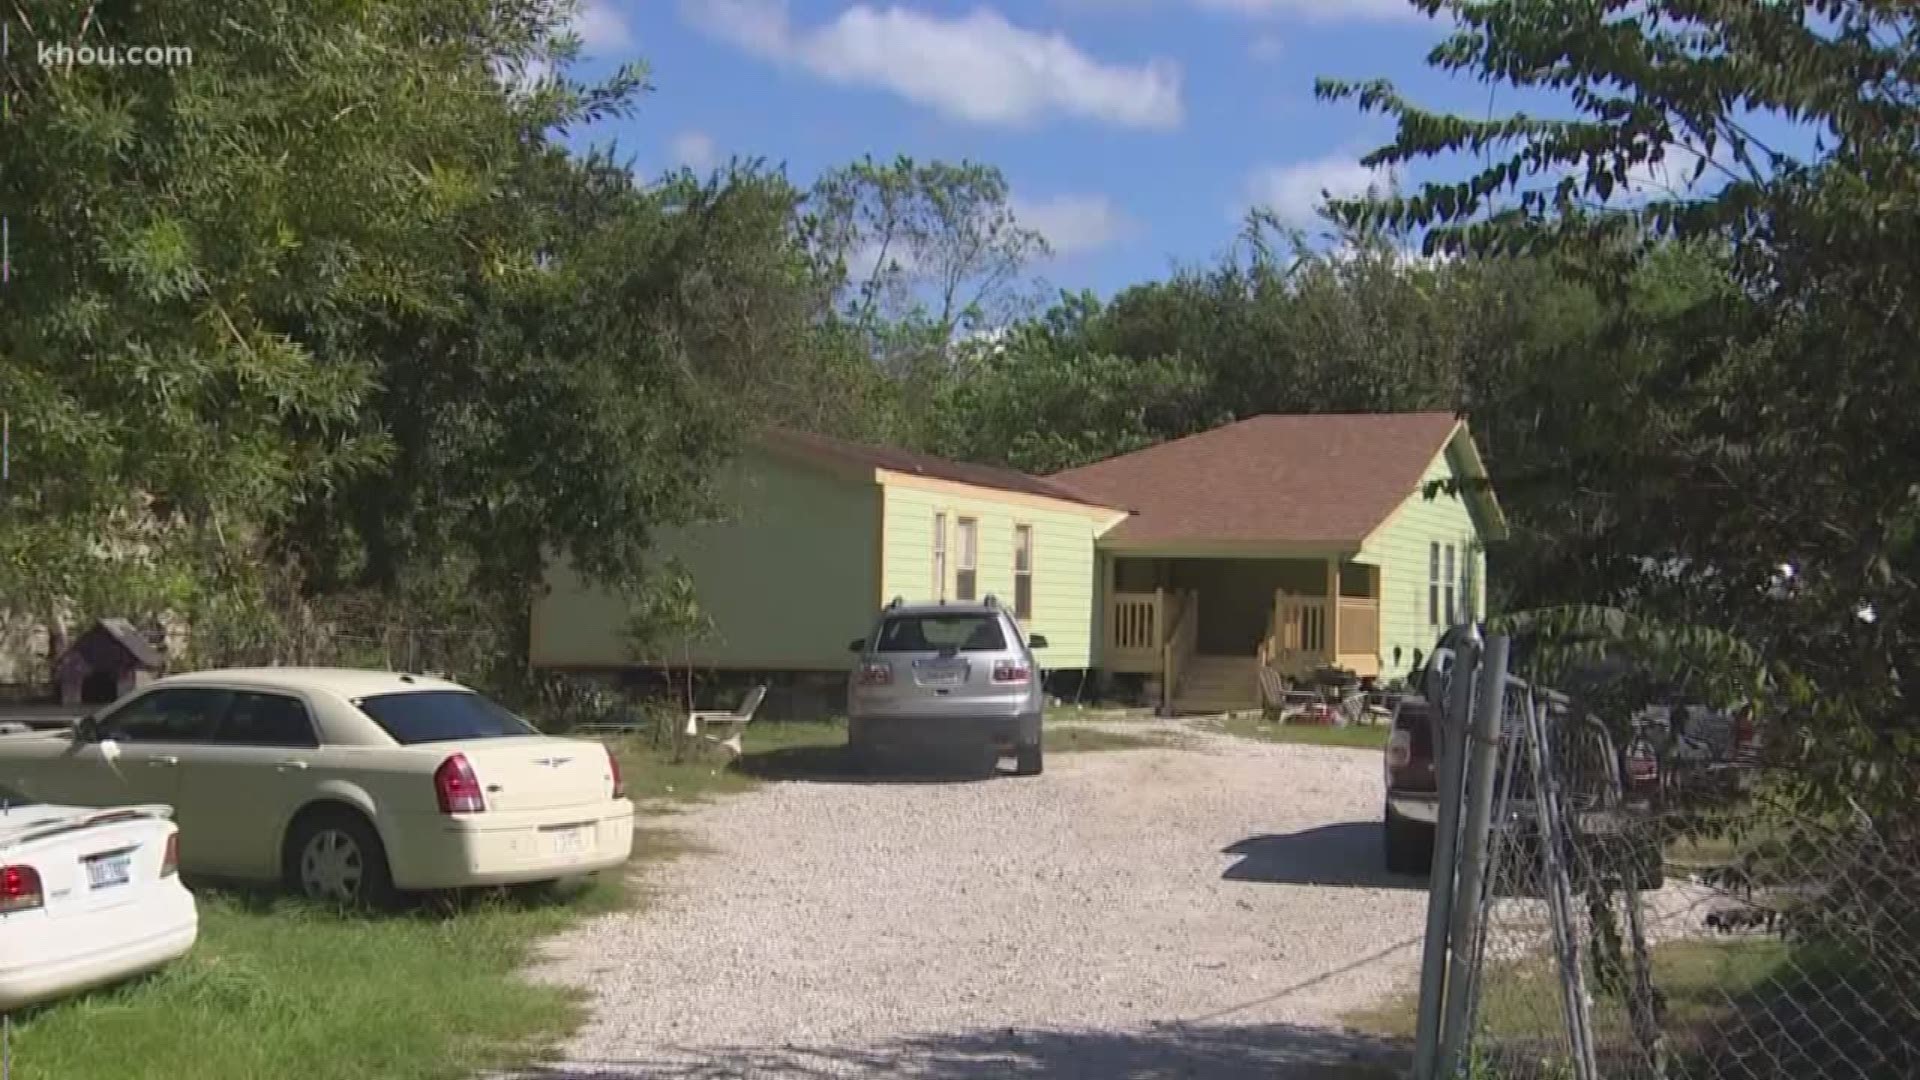 A 2-year-old girl was mauled to death by her family's dog Friday afternoon in Alvin.